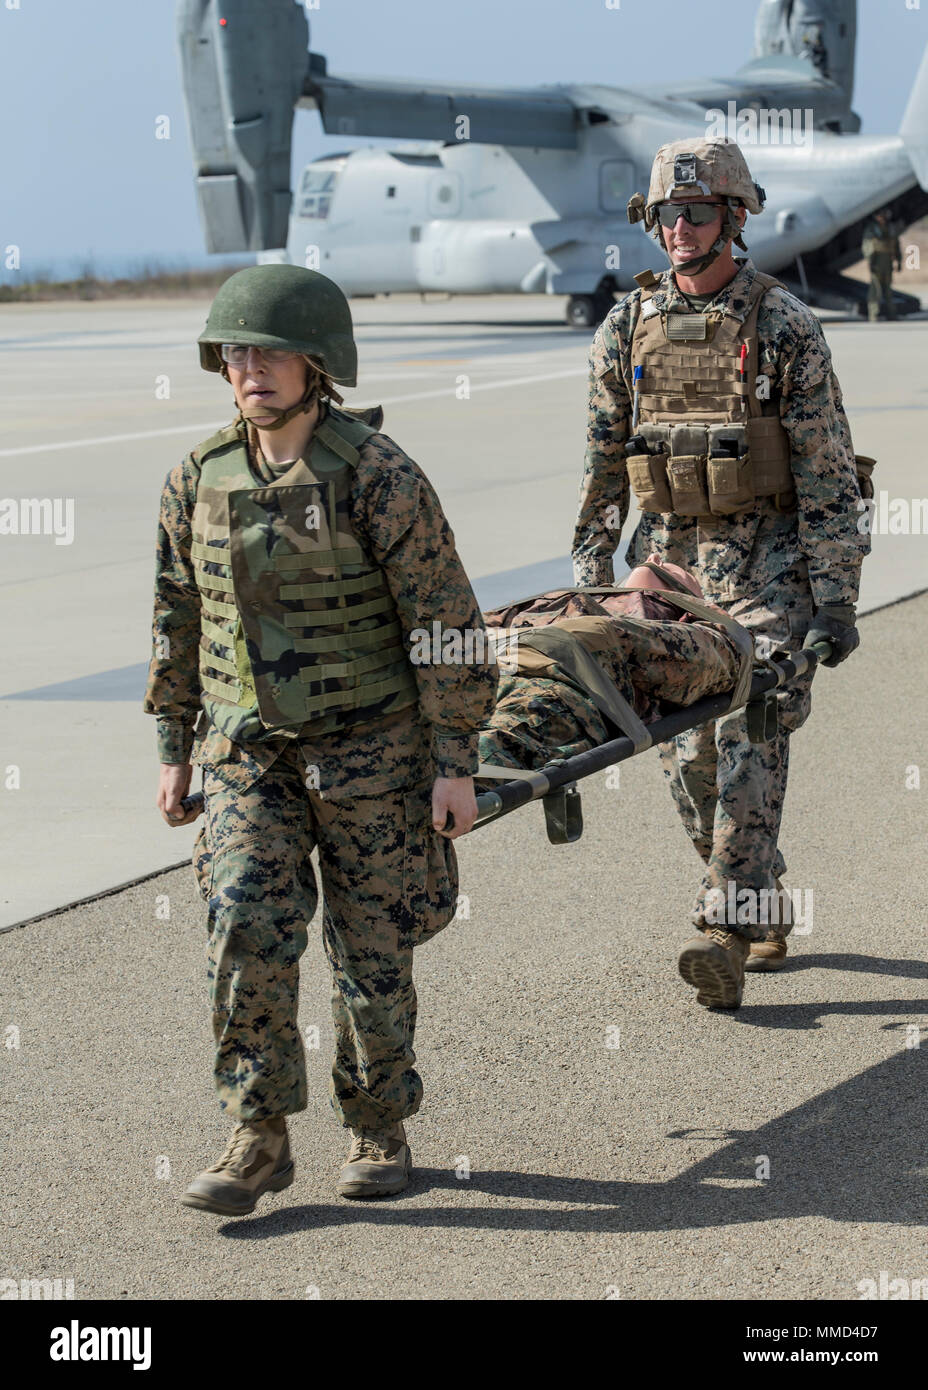 U.S. Marine Corps Cpl. Kealy McMullen and Sgt. Jonathan Lambert carry a mock casualty towards medical attention on Camp Pendleton, Calif. October 18, 2017. Marines and Sailors with MAG-39, Weapons and Field Training Battalion, and 1st Medical Battalion conducted a Combat Operational Medical Emergency Transport Training exercise to prepare for future deployments. (U.S. Marines Corps photo by Pfc. Dalton S. Swanbeck) Stock Photo